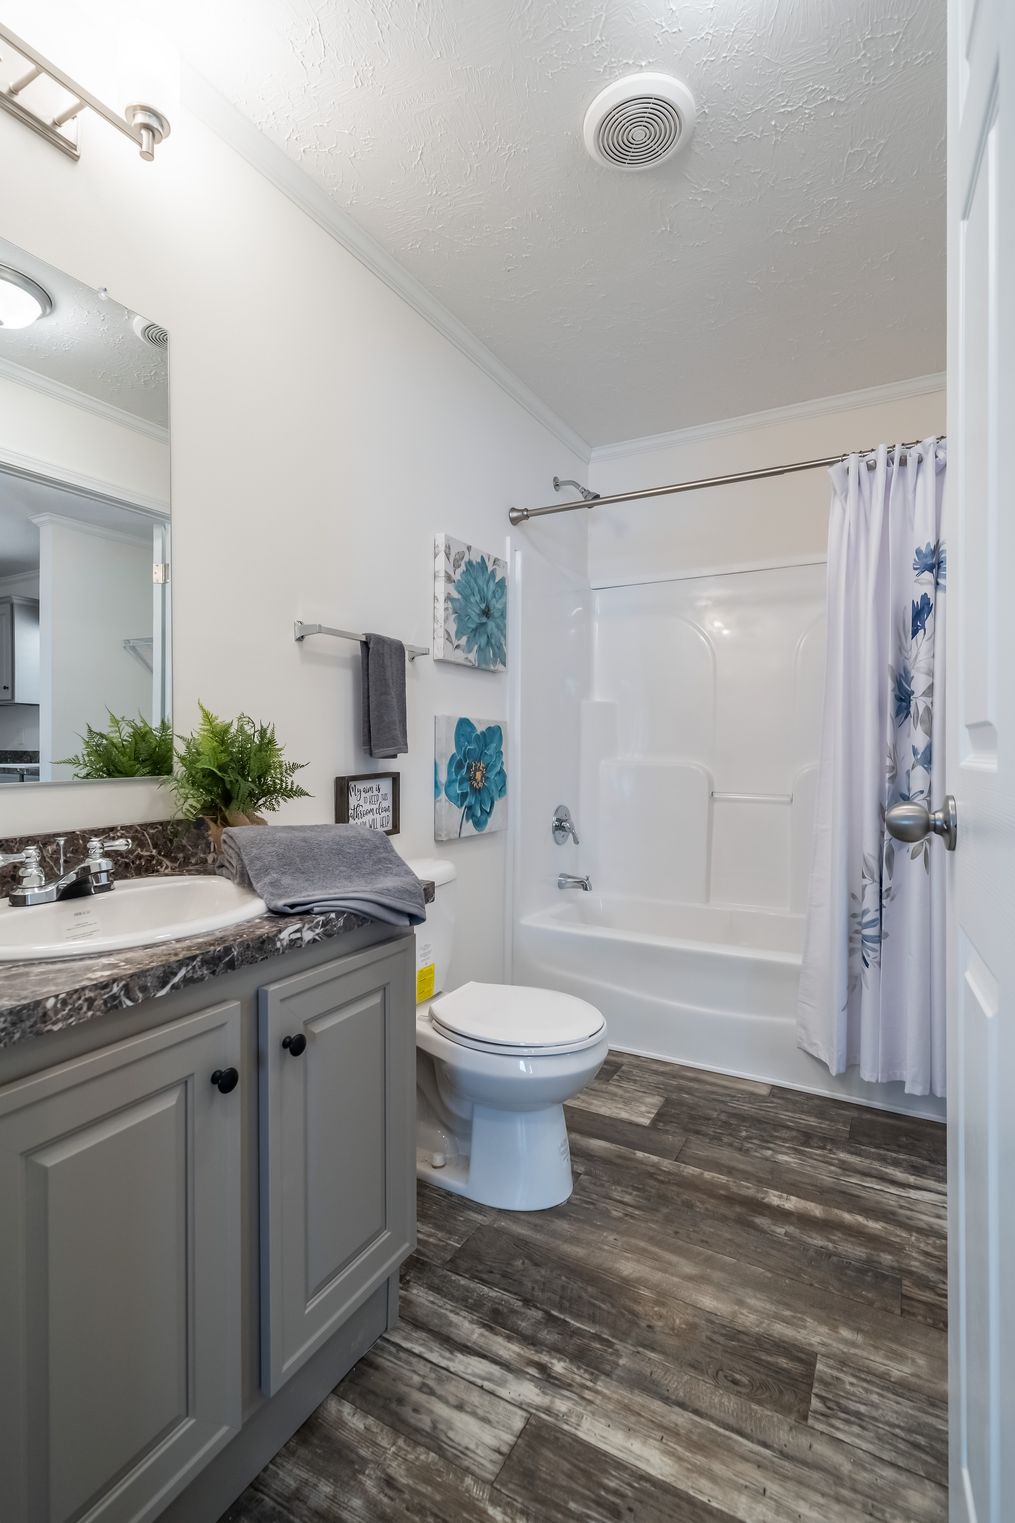 The 6110 ROCKETEER 4428 Guest Bathroom. This Manufactured Mobile Home features 3 bedrooms and 2 baths.